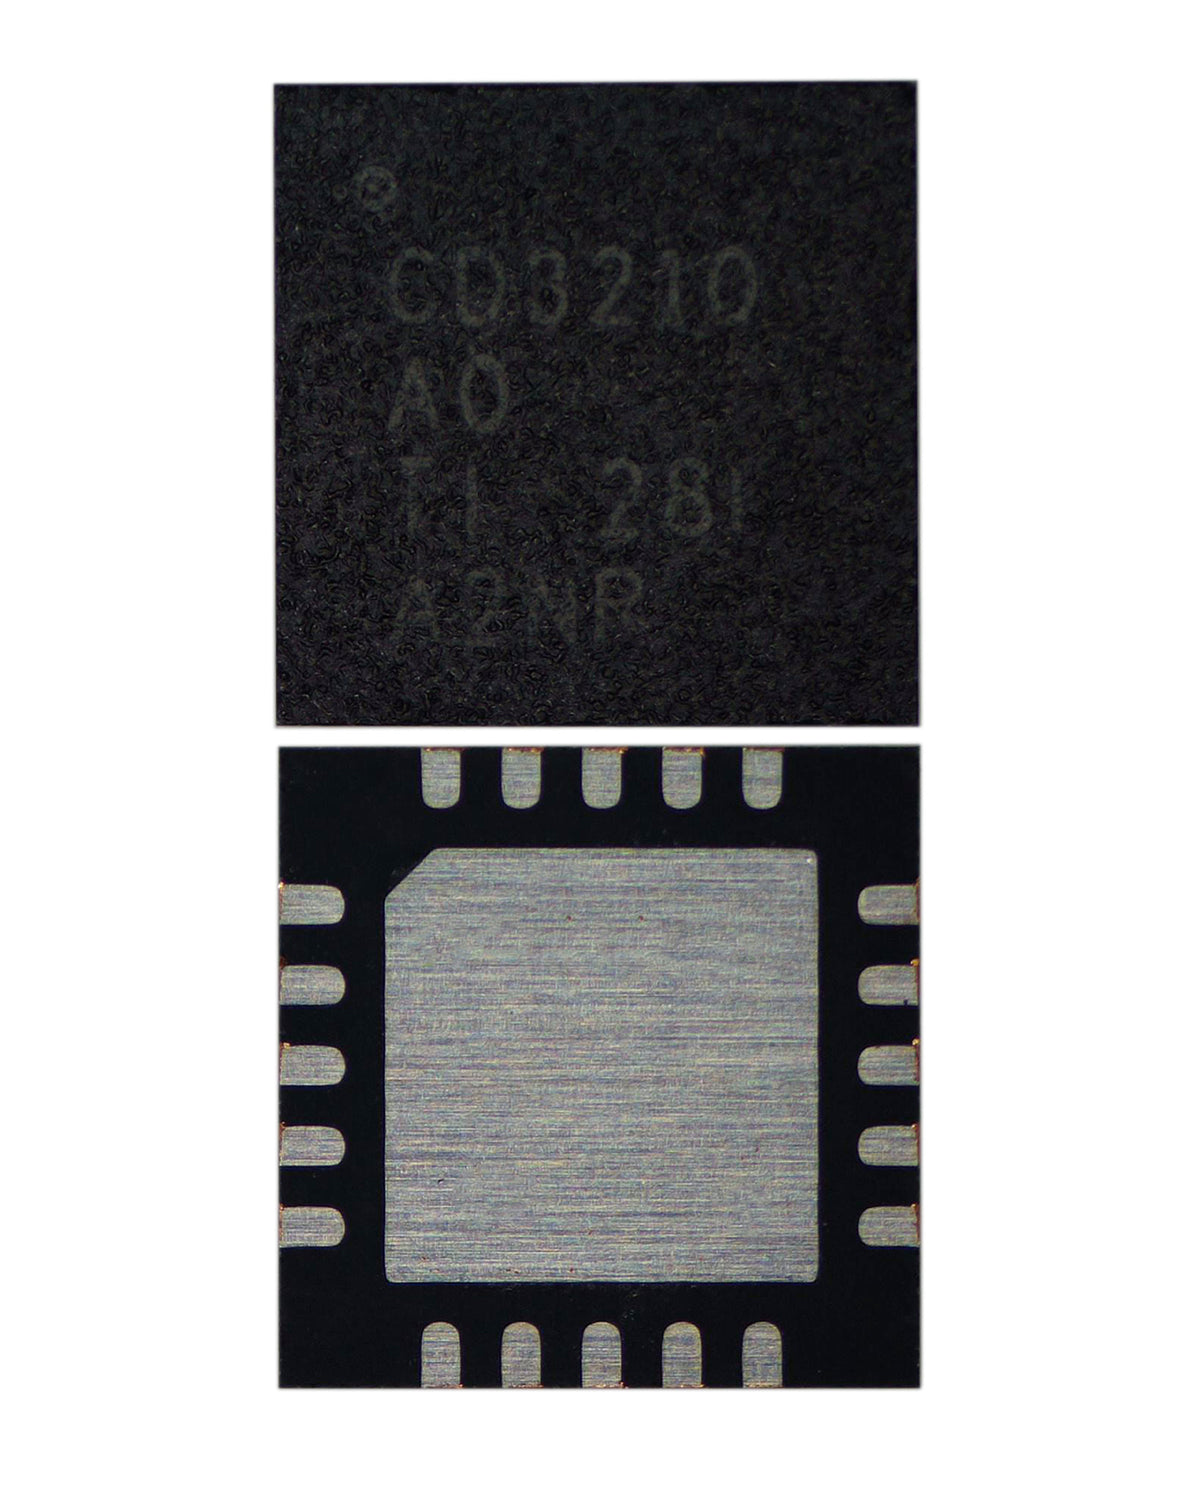 POWER IC CHIP COMPATIBLE WITH NOTEBOOKS / MACBOOKS (CD3210A0: QFN-20PIN)